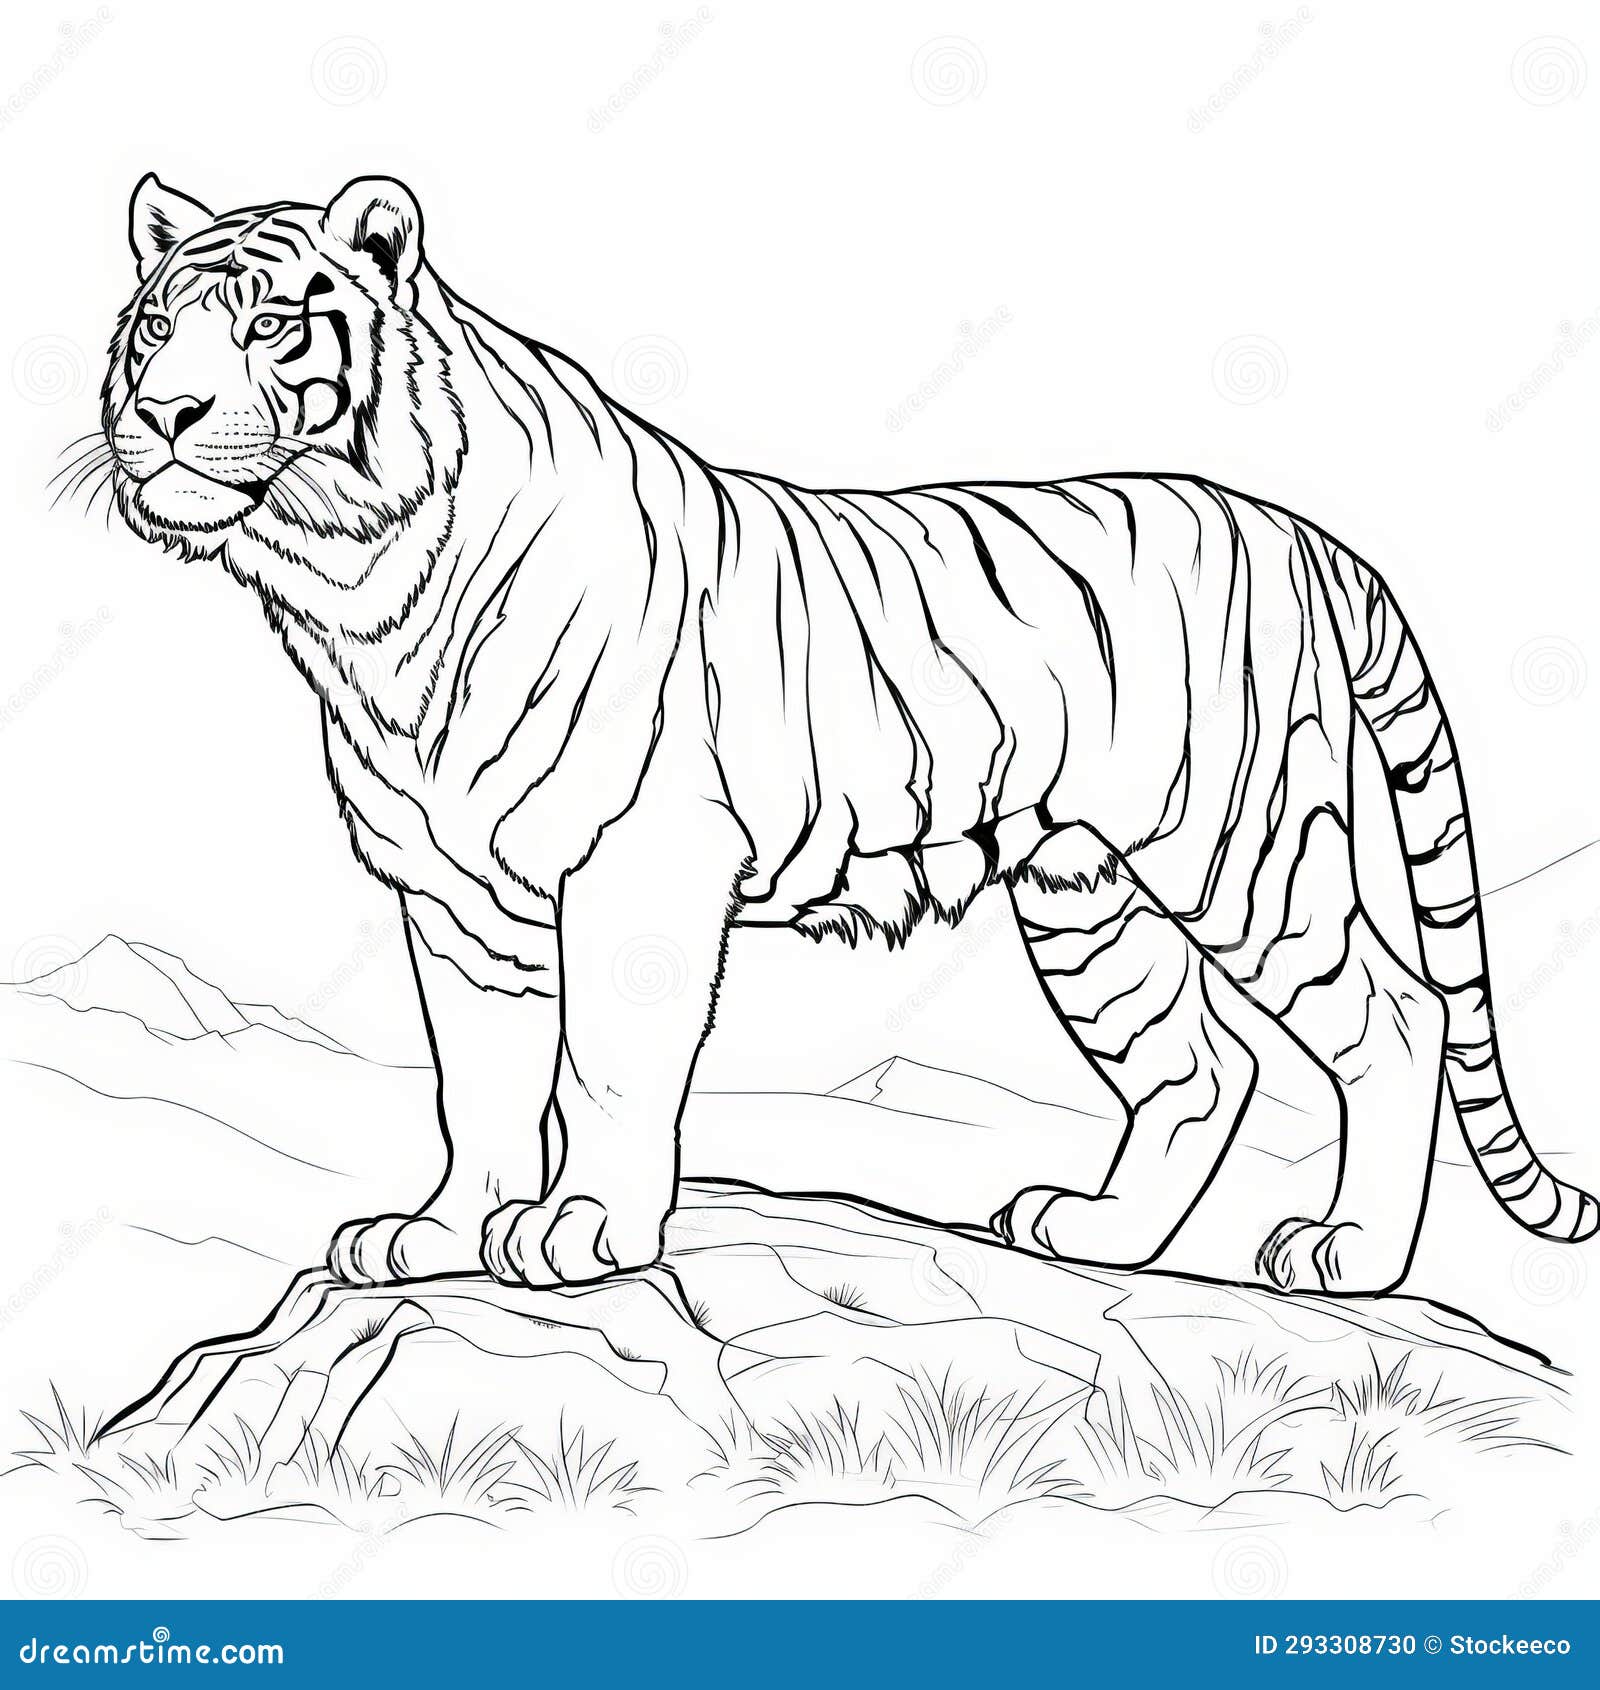 Realistic tiger coloring pages dark violet and amber perspective stock illustration